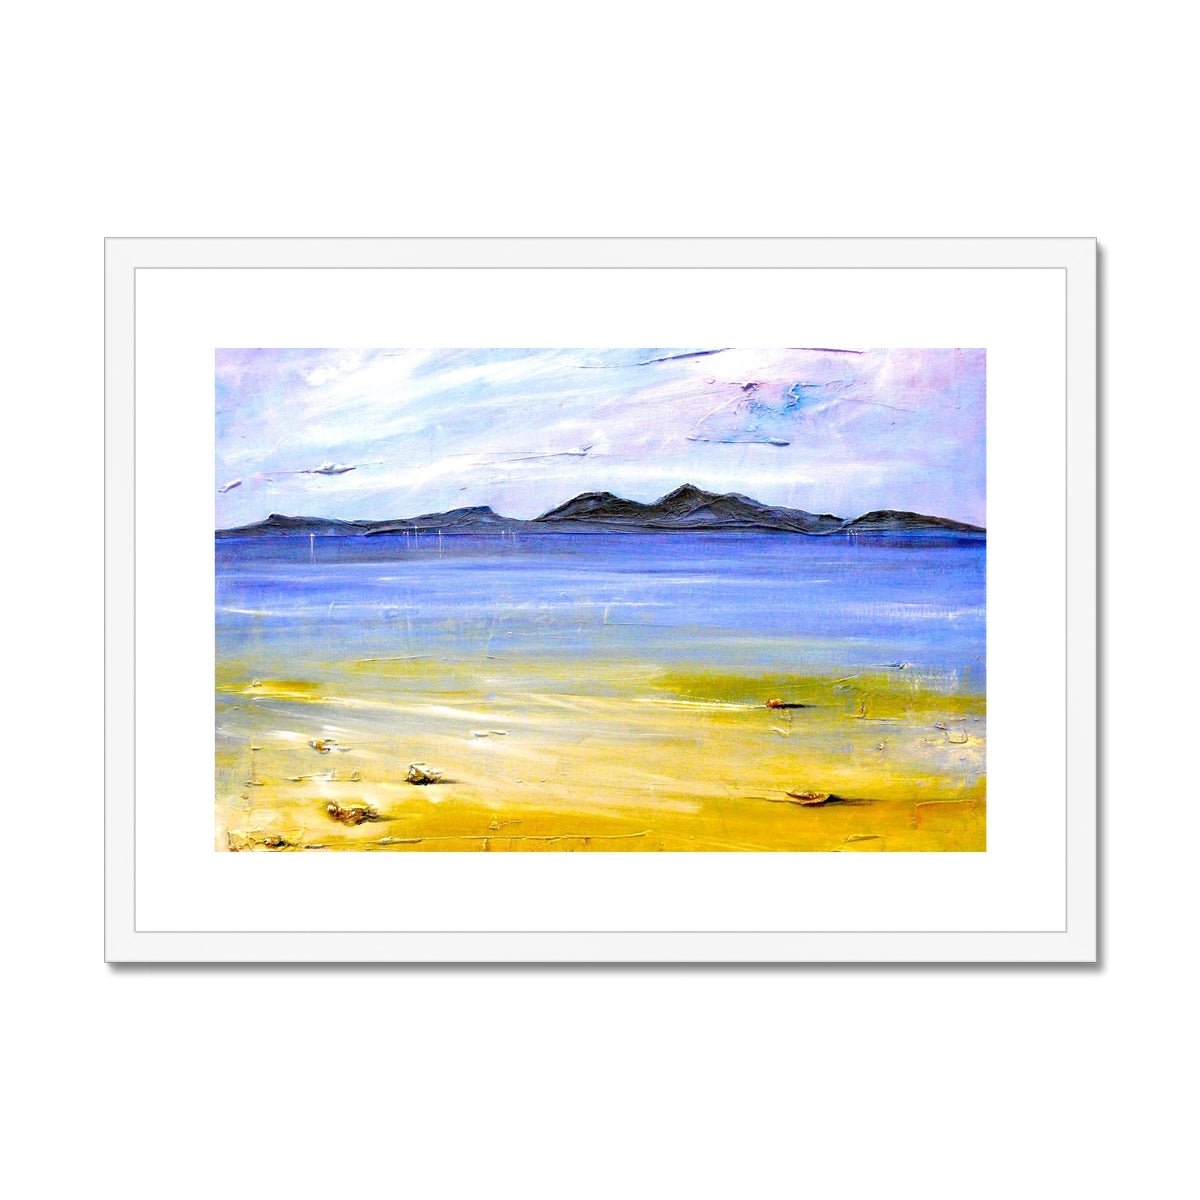 Camusdarach Beach Arisaig Painting | Framed & Mounted Prints From Scotland-Framed & Mounted Prints-Scottish Highlands & Lowlands Art Gallery-A2 Landscape-White Frame-Paintings, Prints, Homeware, Art Gifts From Scotland By Scottish Artist Kevin Hunter